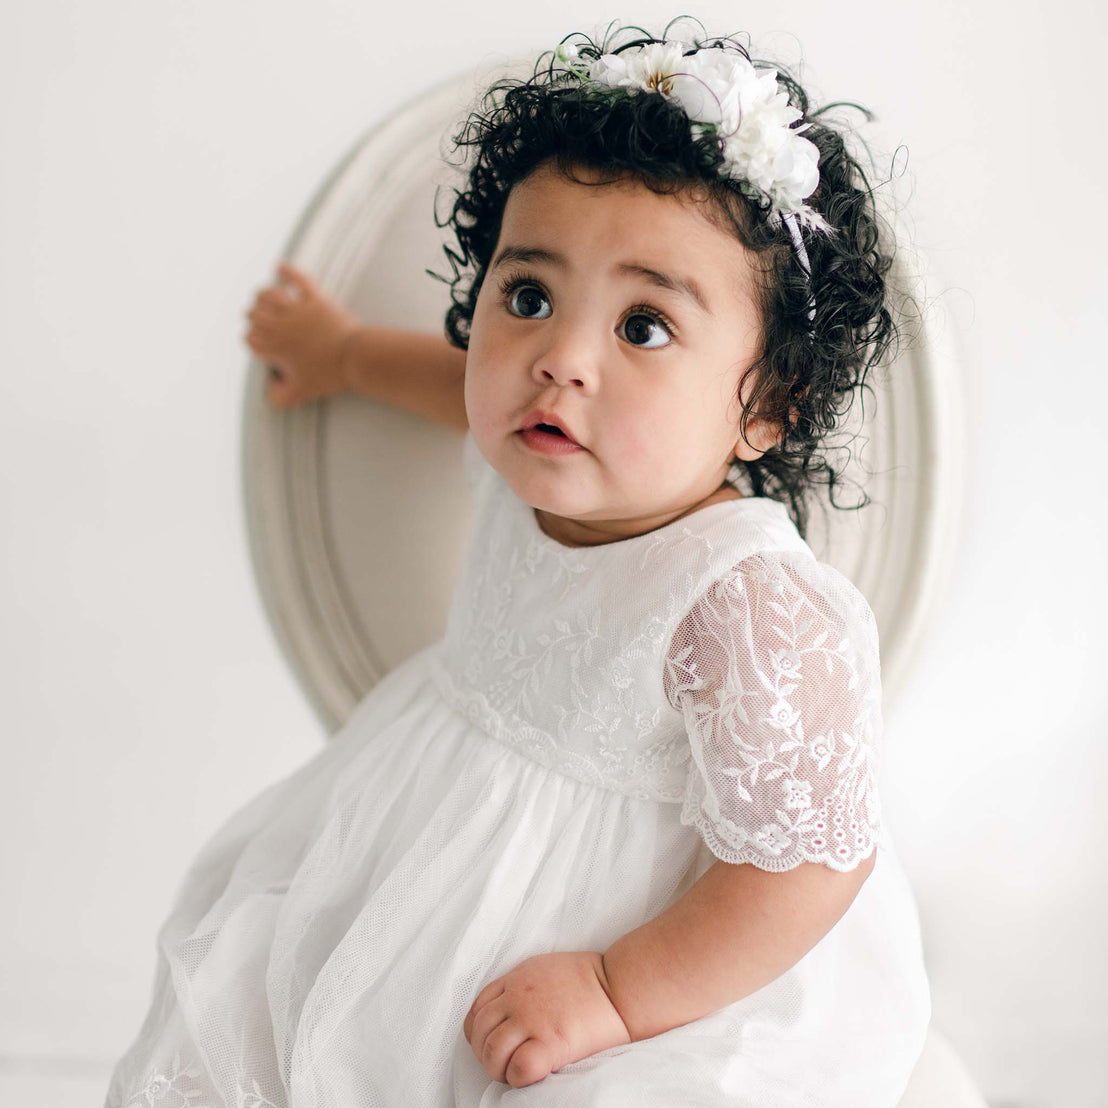 A baby with curly hair, wearing an Ella Romper Dress adorned with embroidered netting lace and a floral headband, sits on a round beige chair. She looks up with a curious expression, holding onto the back of the chair with one hand. The background is plain and light-colored.